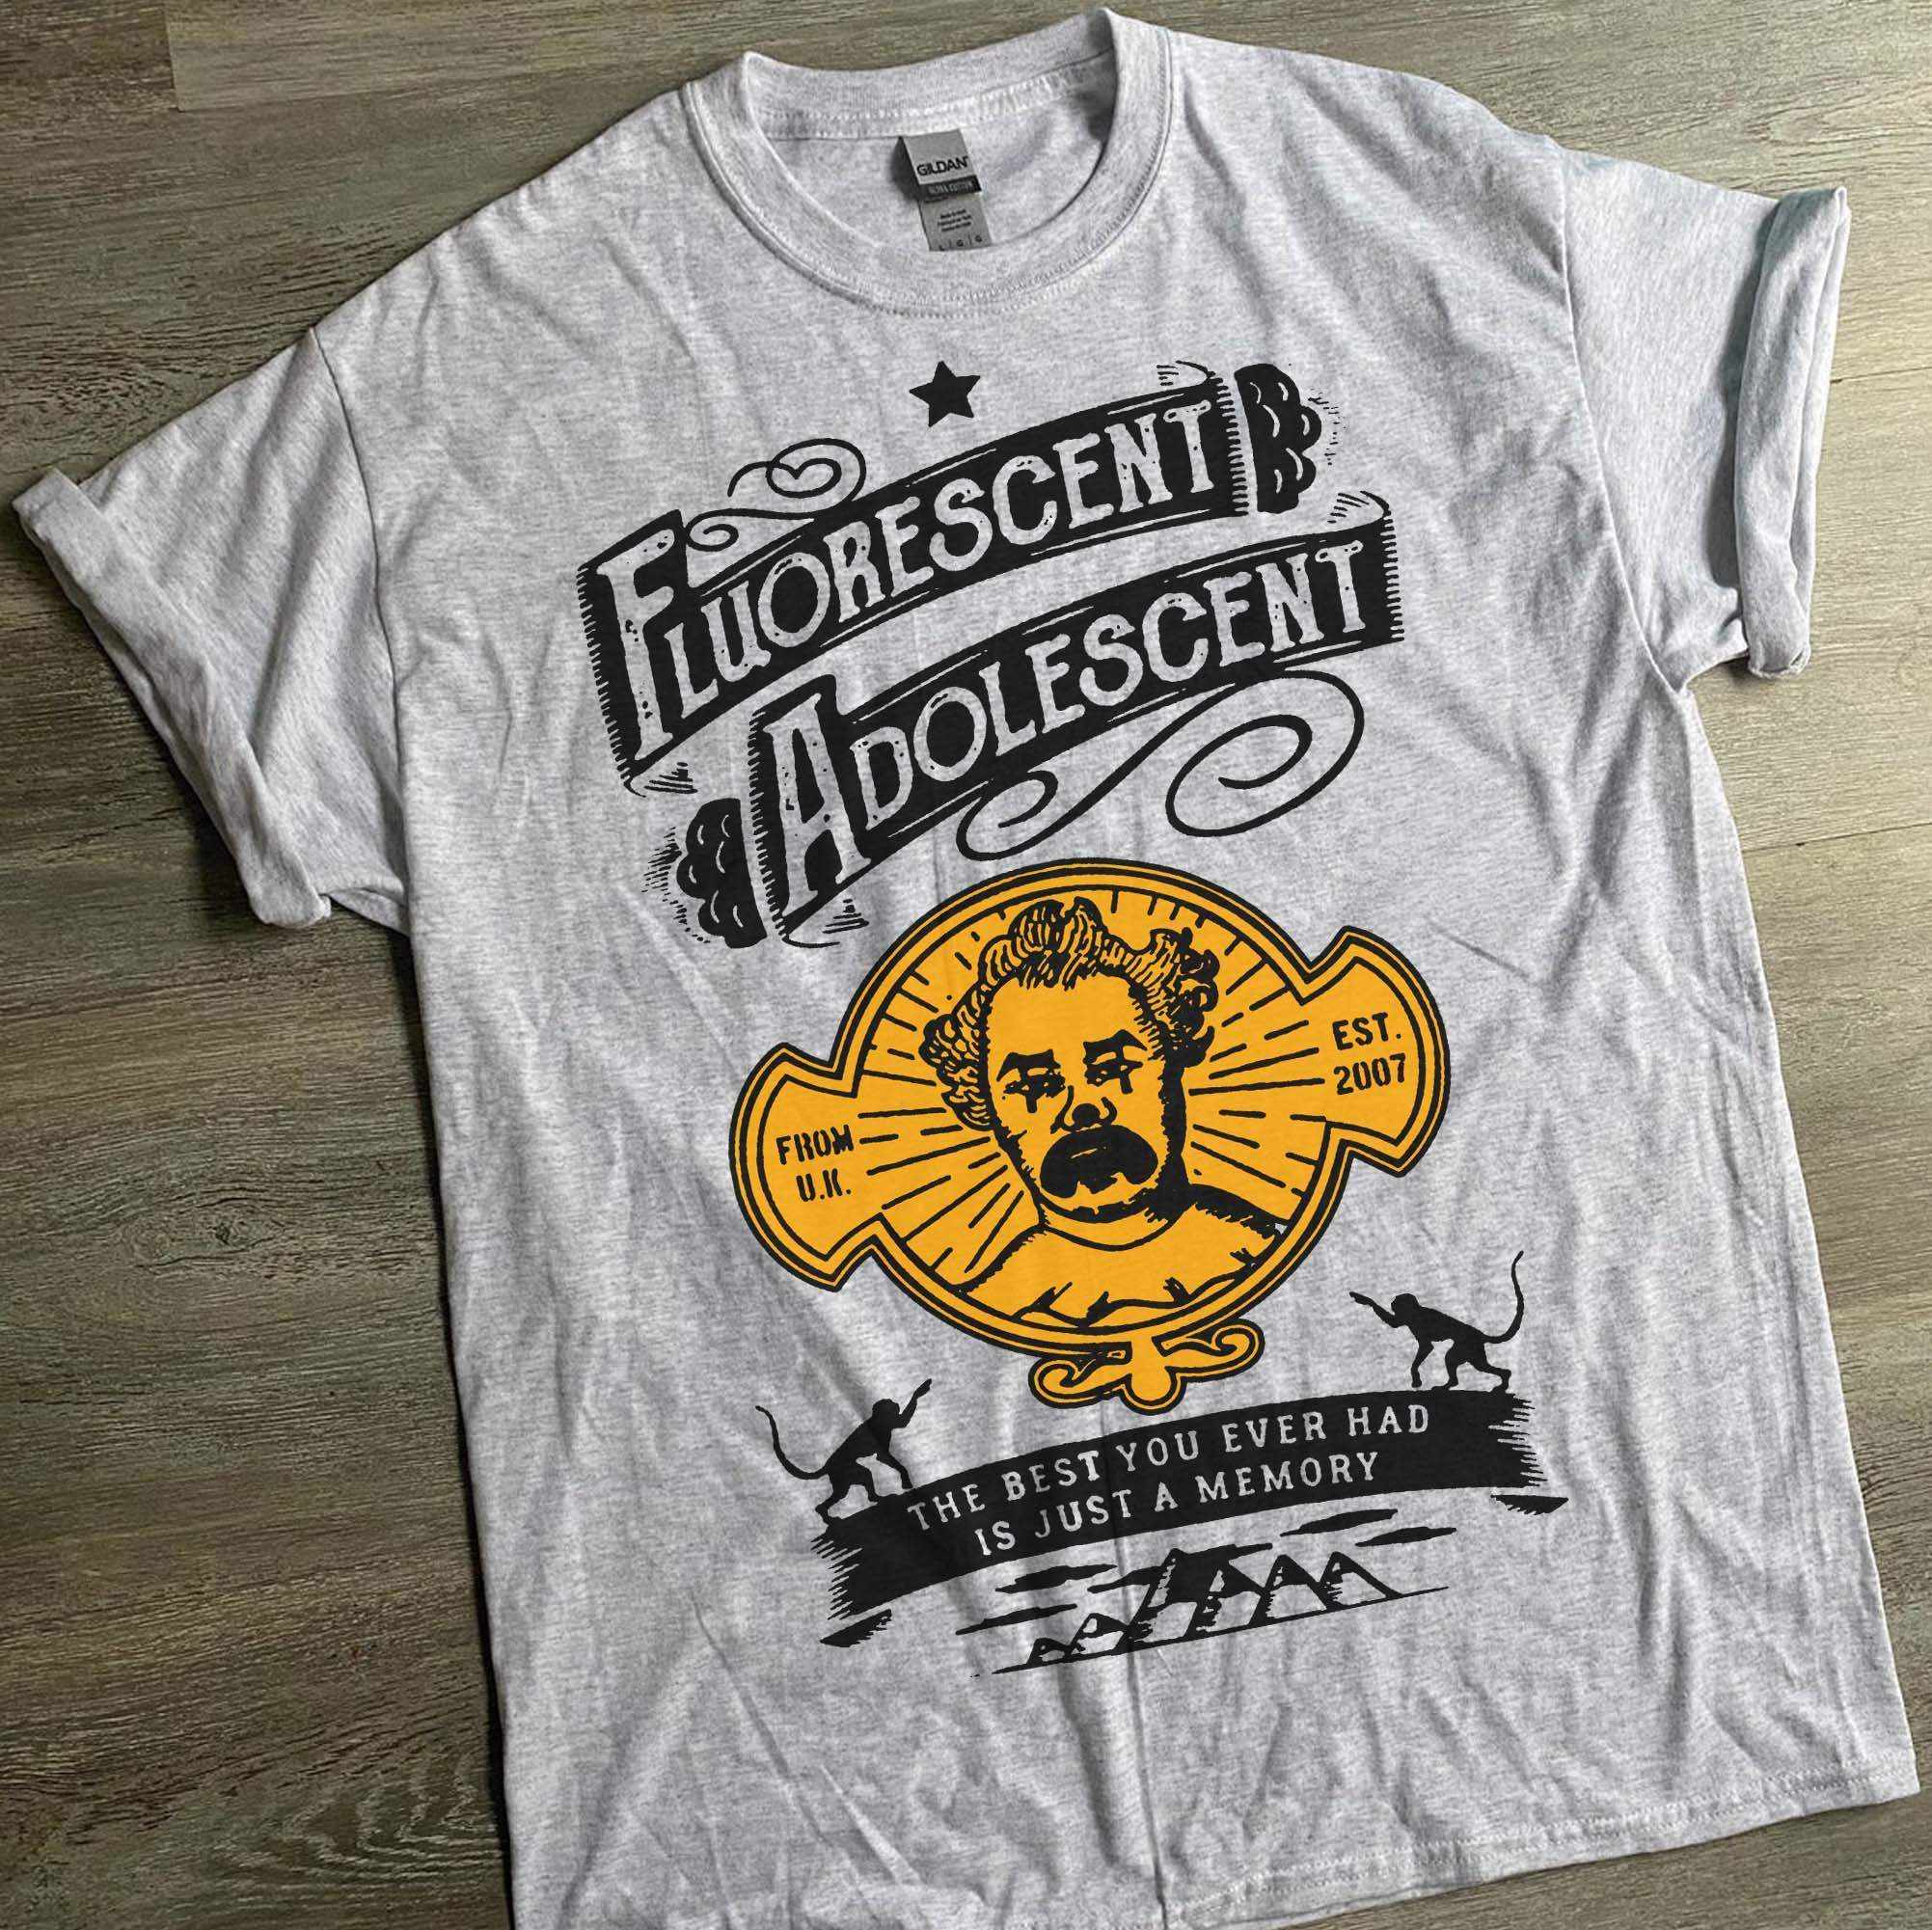 Fluorescent adolescent - The best you ever had is just a memory, Arctic Monkeys, Clown graphic T-shirt